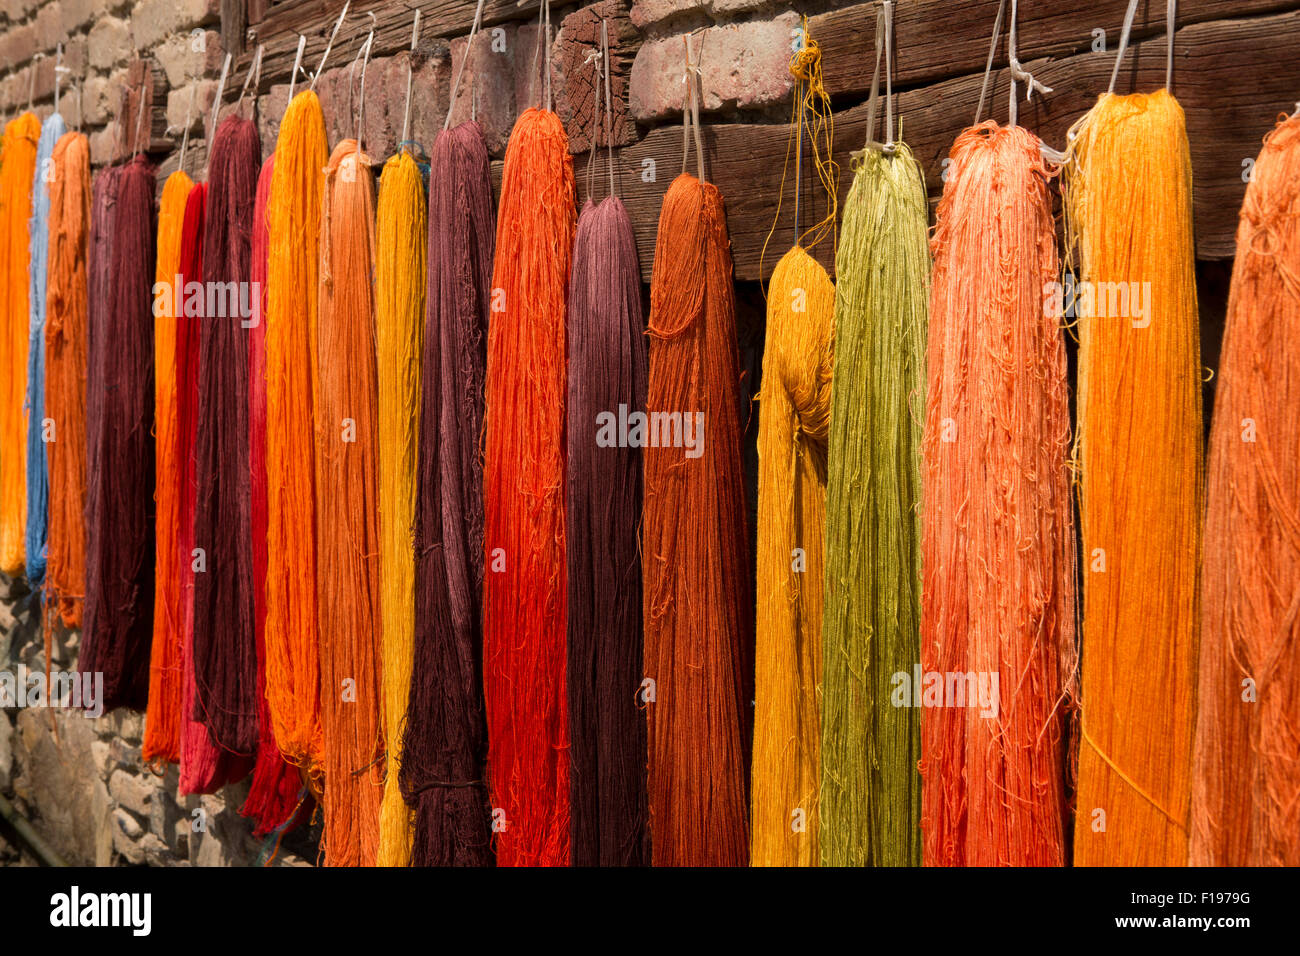 India, Jammu & Kashmir, Srinagar, Old City, crafts, dyed warm coloured embroidery threads hanging on fence to dry Stock Photo